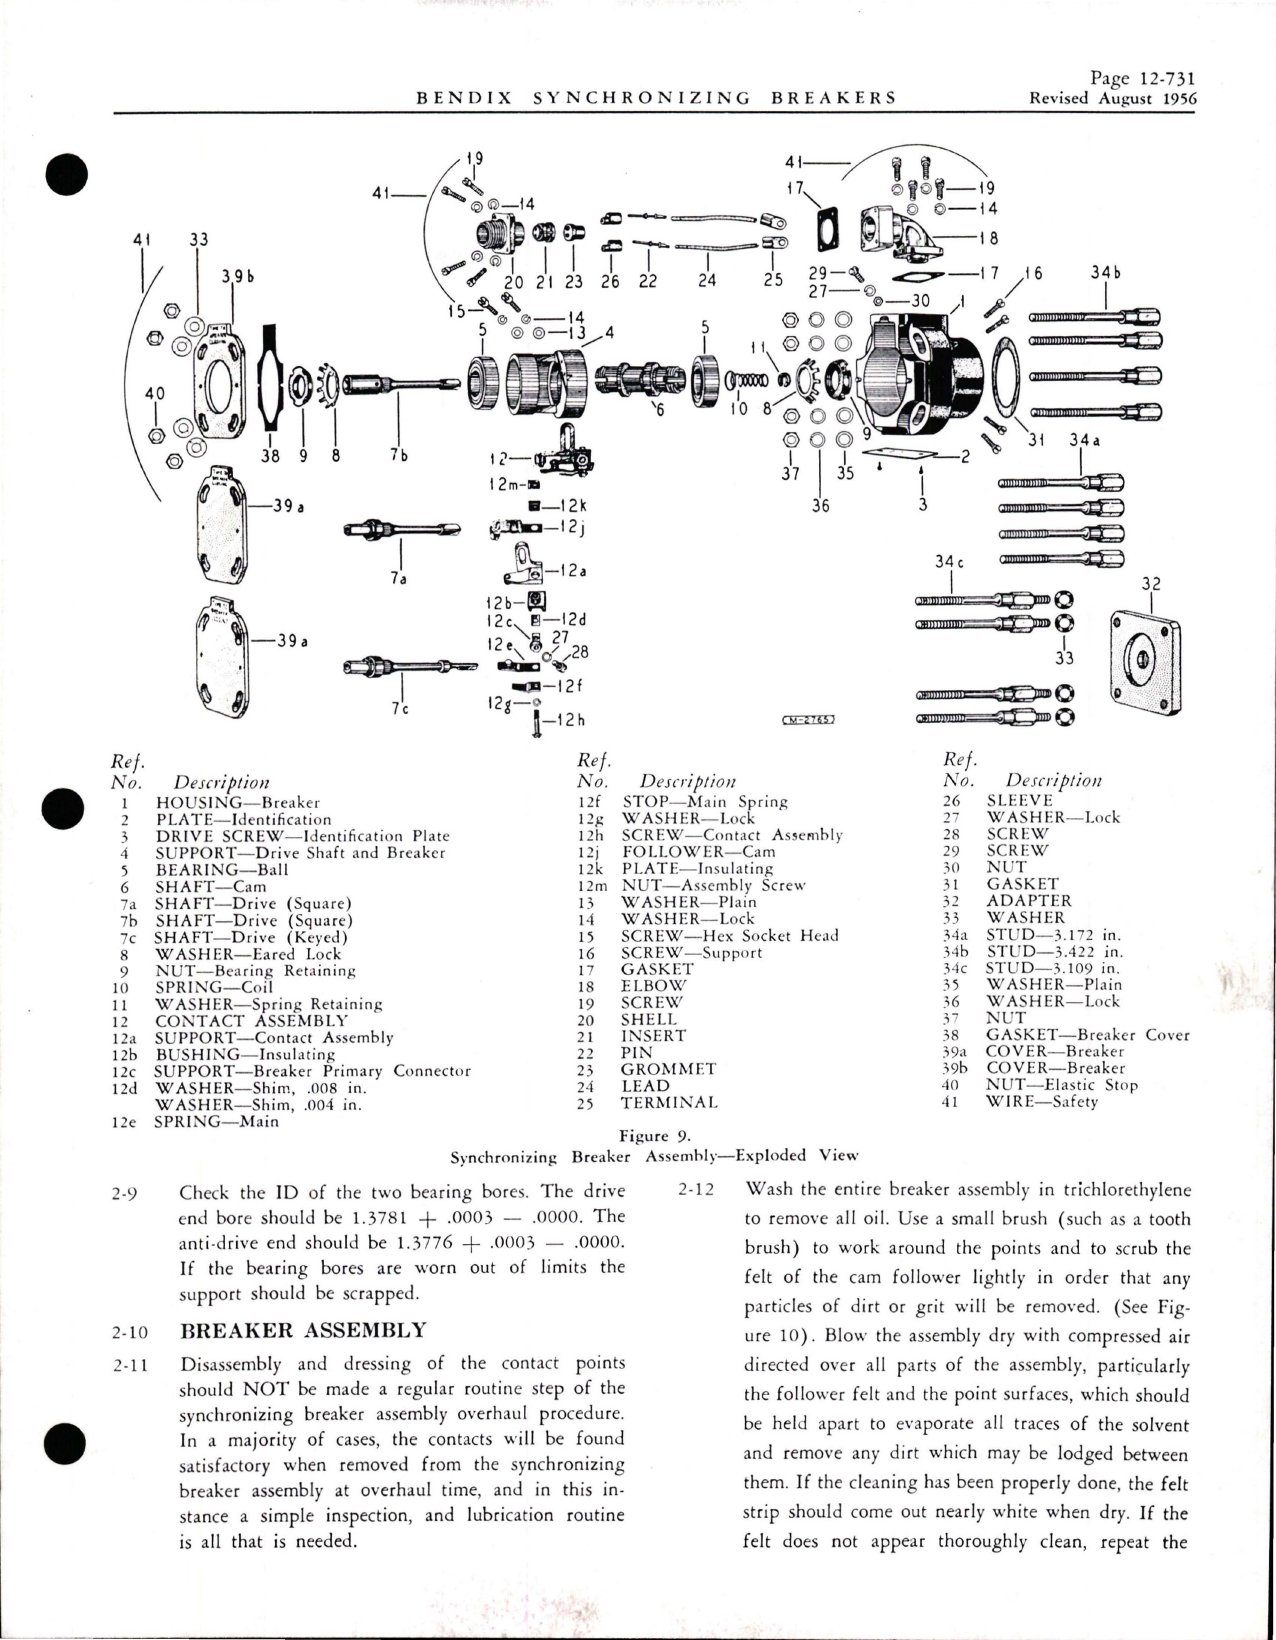 Sample page 7 from AirCorps Library document: Overhaul Instructions for Synchronizing Breaker Assembly - 10-35370-1, 10-77120-1, and 10-35330-1 thru -5